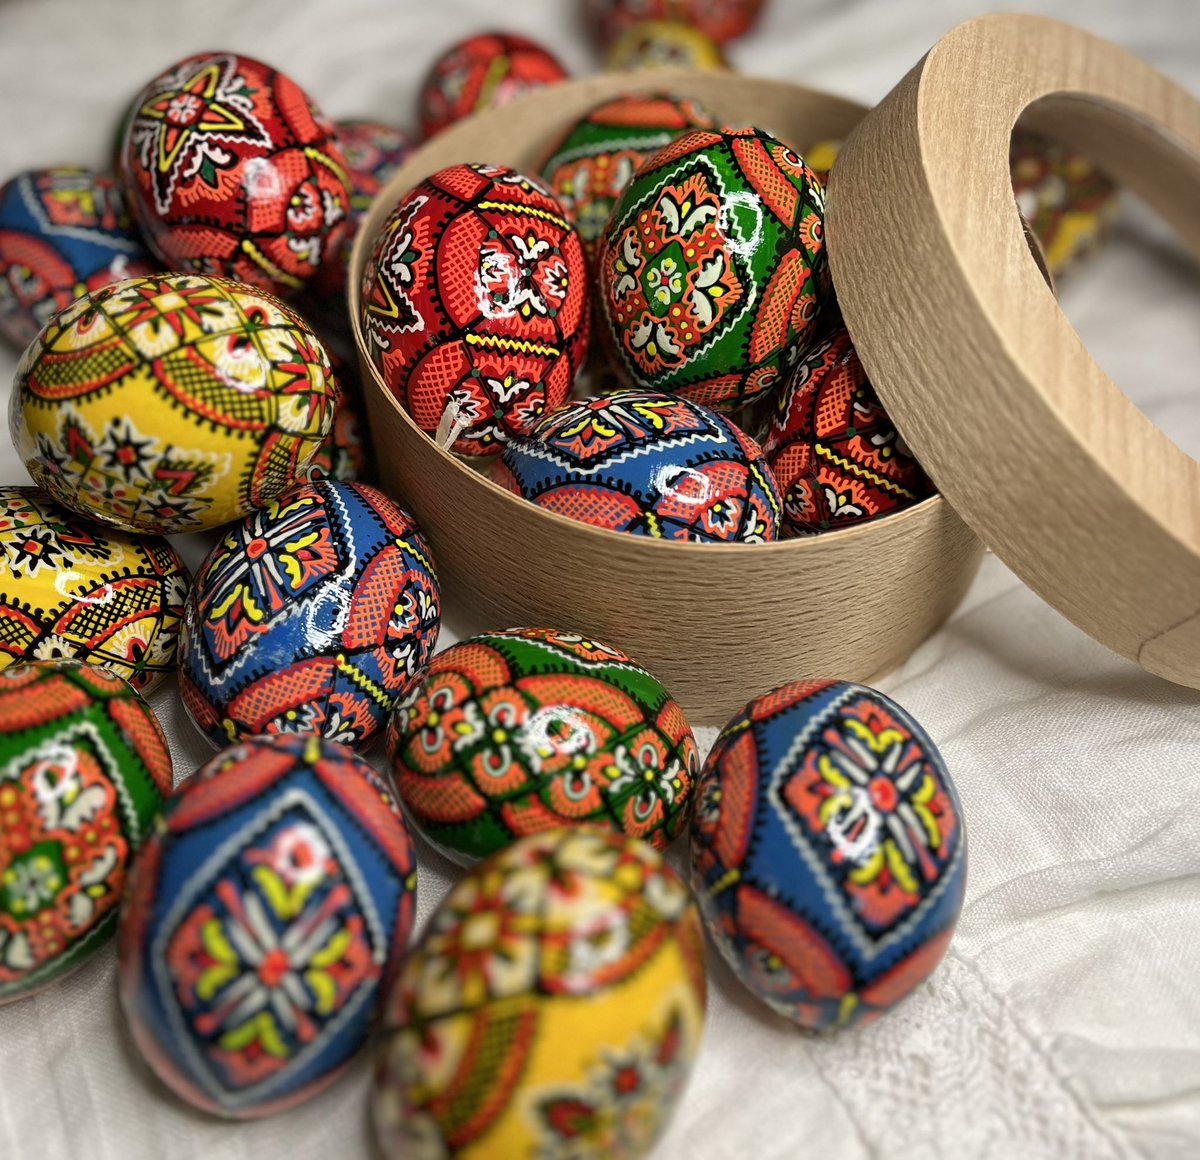 #Save 40% Painted eggs Easter #HANDPAINTED UKRAINIAN Set 6 #Handmade by EmbroideredCloth etsy.me/3SZQrS8 via @Etsy

#easter2024 #easterdecor #easterbasket #EasterEggHunt #EasterNaRally2024 #easter2024 #handmadegifts #handmadejewelry #HandmadeHour #giftideas #eastergift